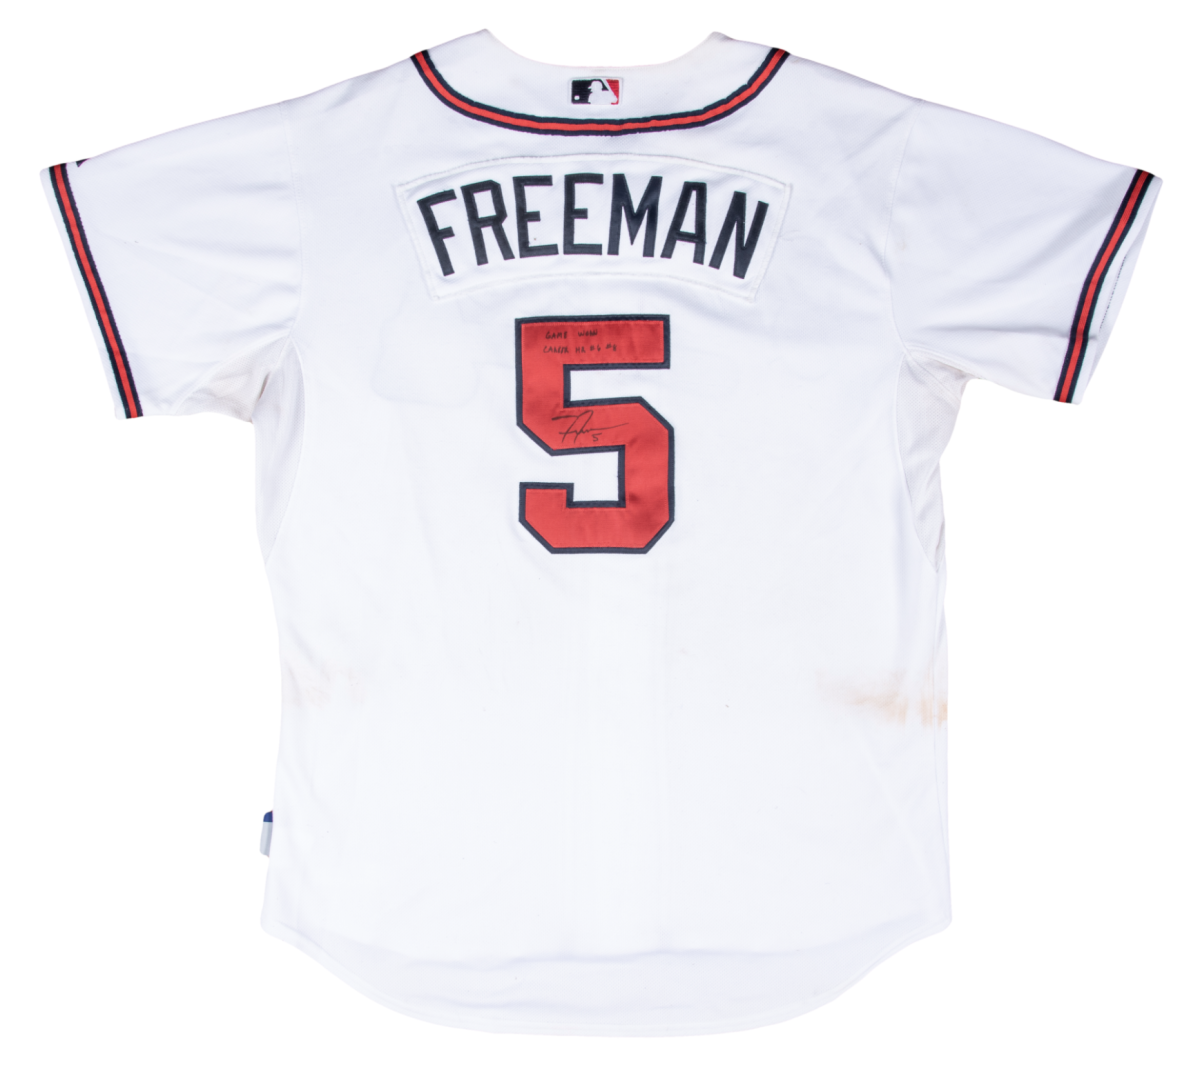 A 2011 signed, game-used jersey from Freddie Freeman's rookie season.